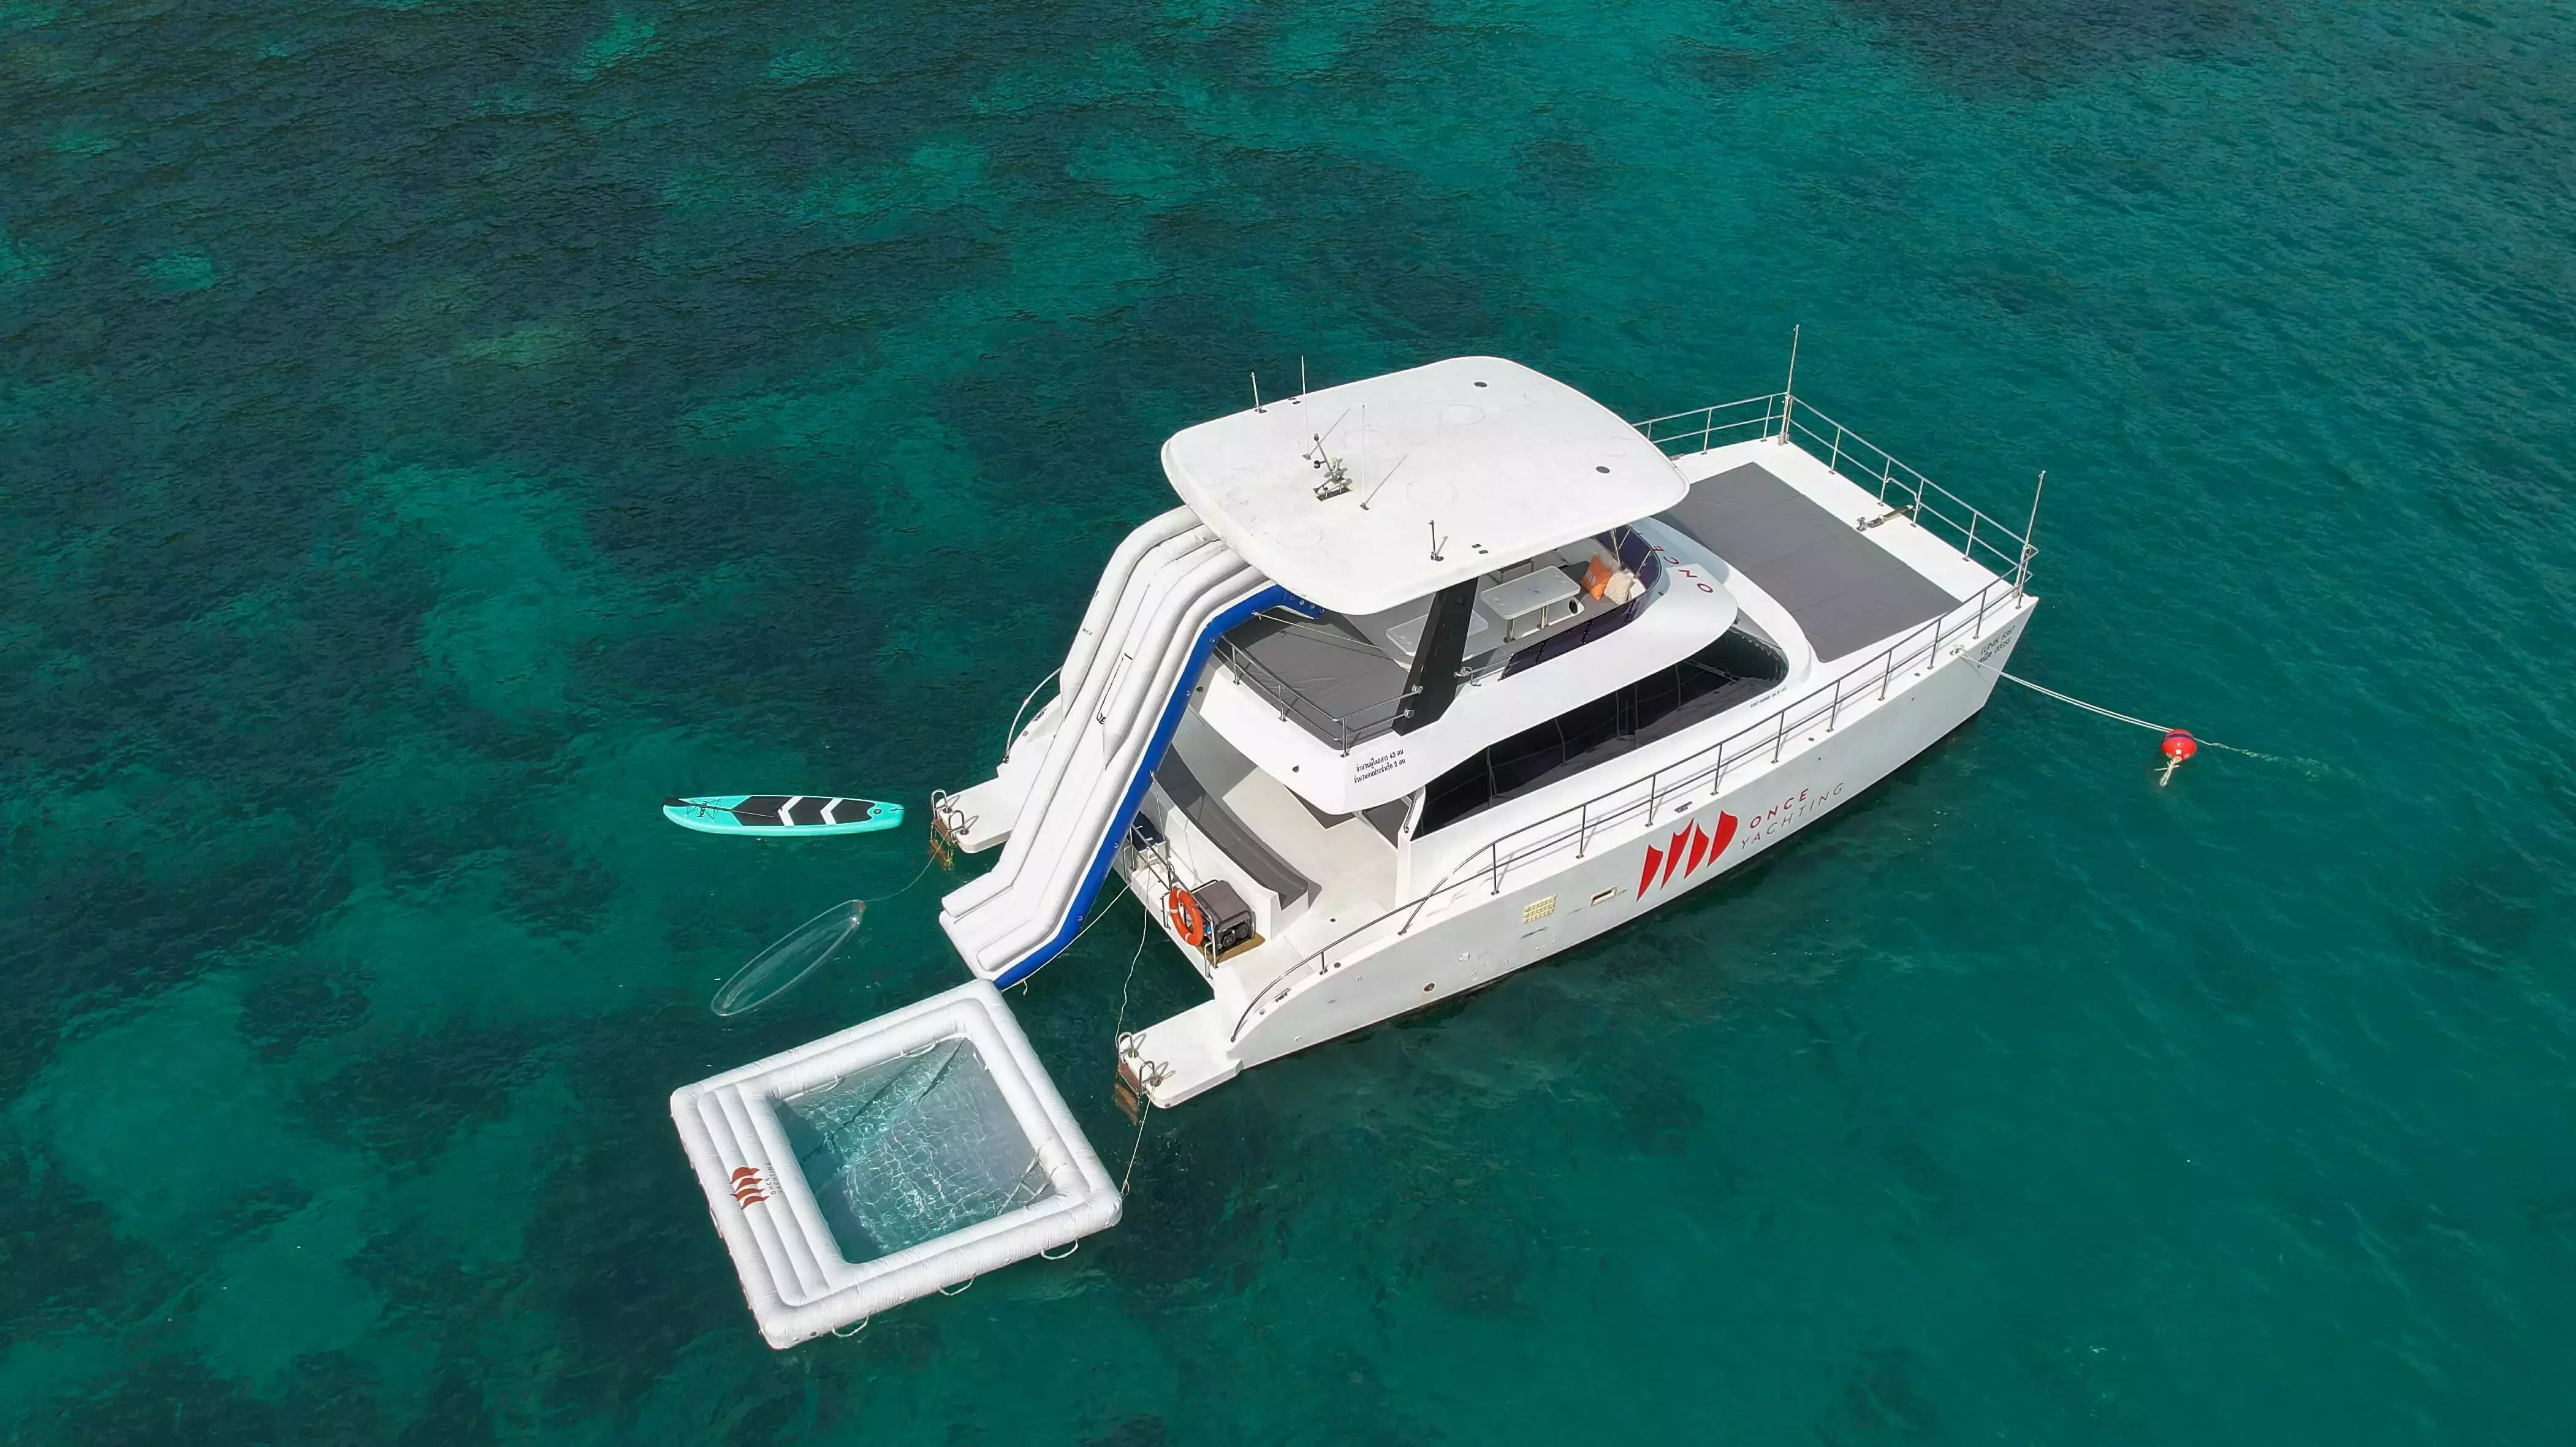 Lunik by Floeth - Top rates for a Rental of a private Power Catamaran in Thailand